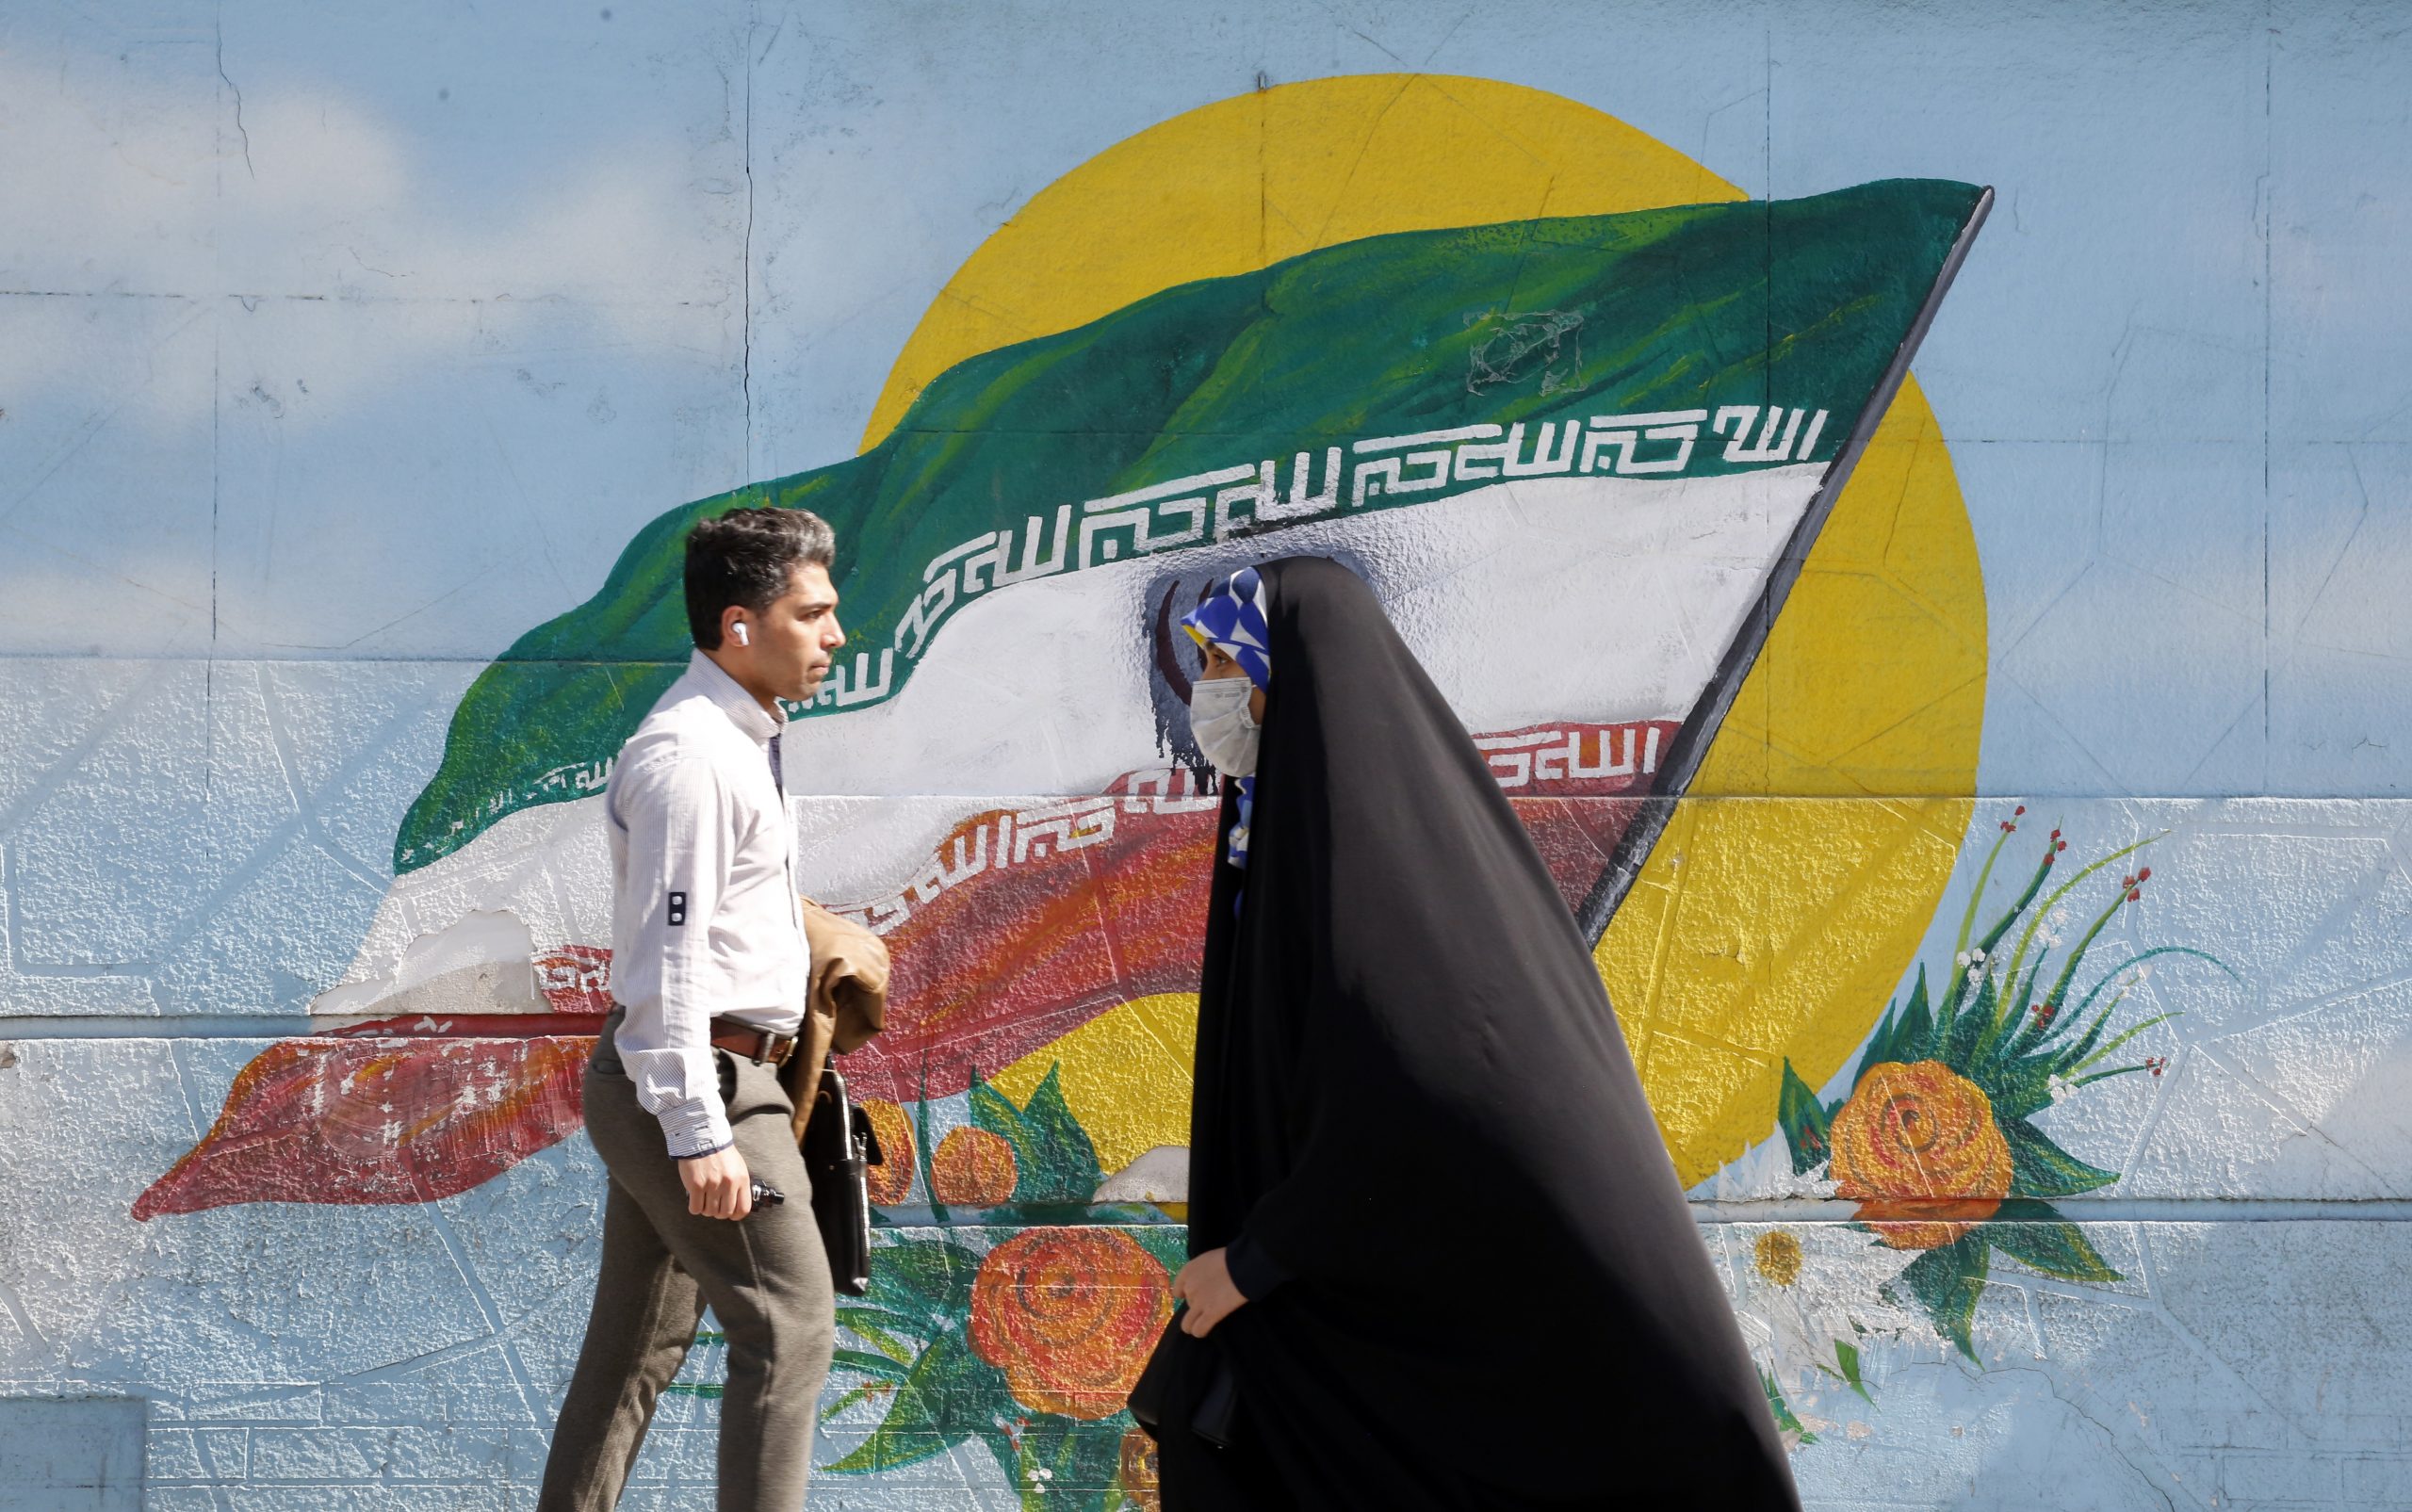 epa10493674 Iranians walk past next to a wall painting of Iran's national flag in downtown Tehran, Iran, 27 February 2023. According to Isna news agency, Iranian foreign minister Amir-Abdoulahian on 26 February 2023 said that Iran is close to reach a nuclear deal with US, after receiving a message from US through Iraq. Iran faces an economic crisis after its currency dropped to its lowest value against the US dollar and other foreign currencies last week, following sanctions imposed by the US and EU, amid tensions over nuclear talks, which have stopped in the wake of recent anti-government protests in the country.  EPA/ABEDIN TAHERKENAREH